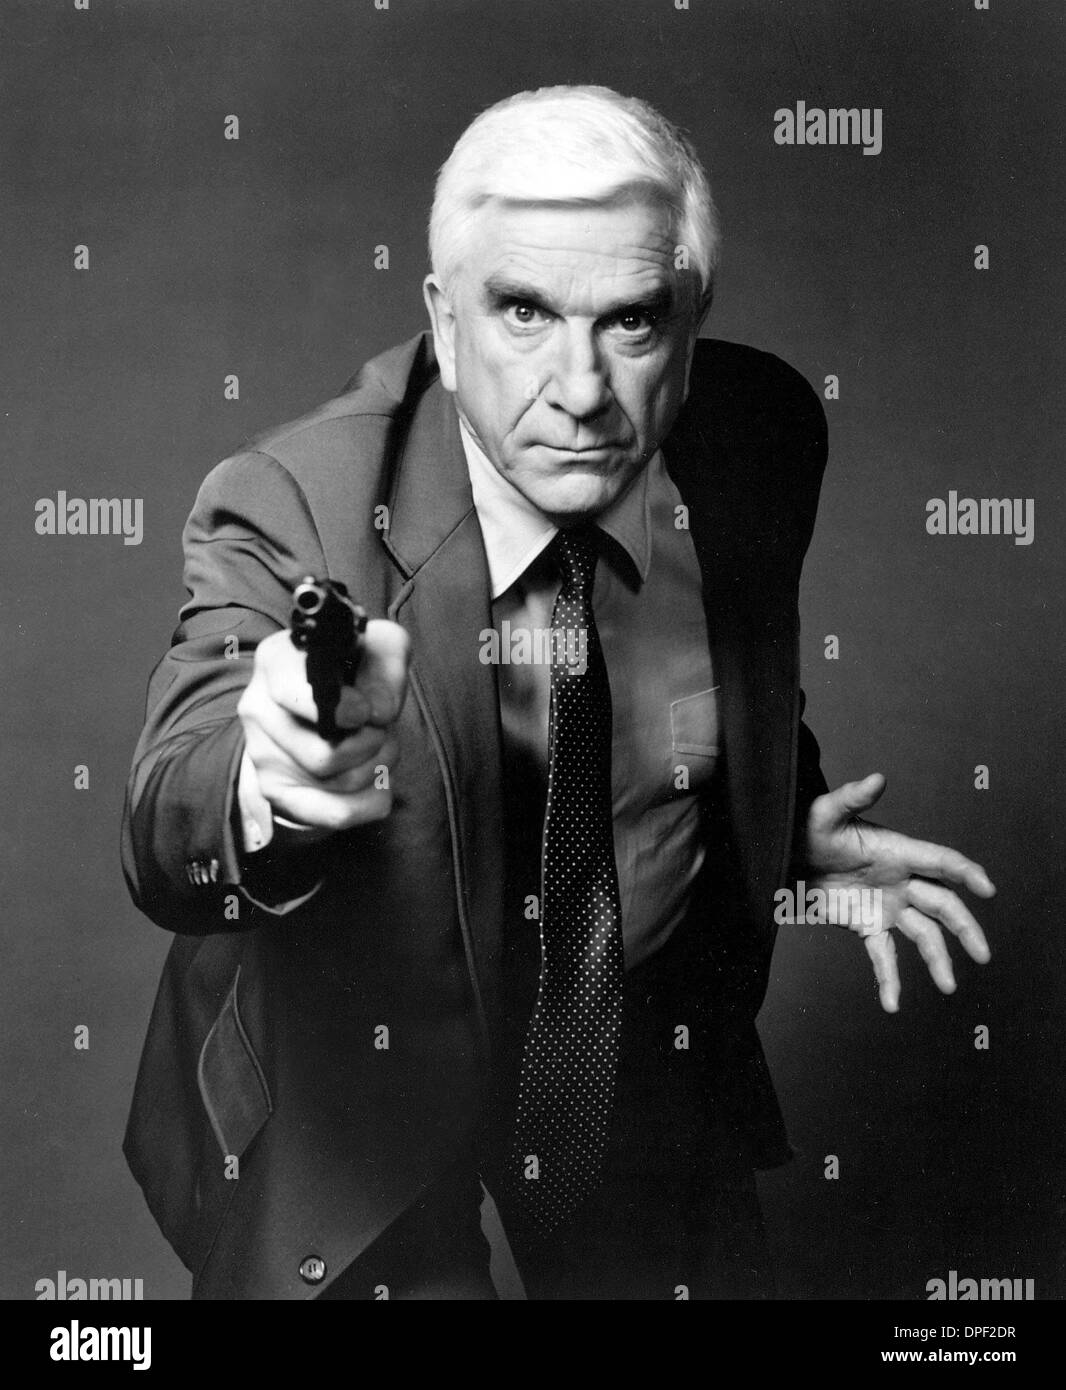 LESLIE NIELSEN (Feb. 11, 1926 - Nov. 28, 2010) was a American actor  who appeared in over 100 films and 1,500 television programs over the span of his career. He began his career with a television role in 1948 and garnered positive reviews as a serious actor for lead roles in 'Forbidden Planet' and 'The Poseidon Adventure'. His deadpan delivery in the spoof disaster movie 'Airplane Stock Photo